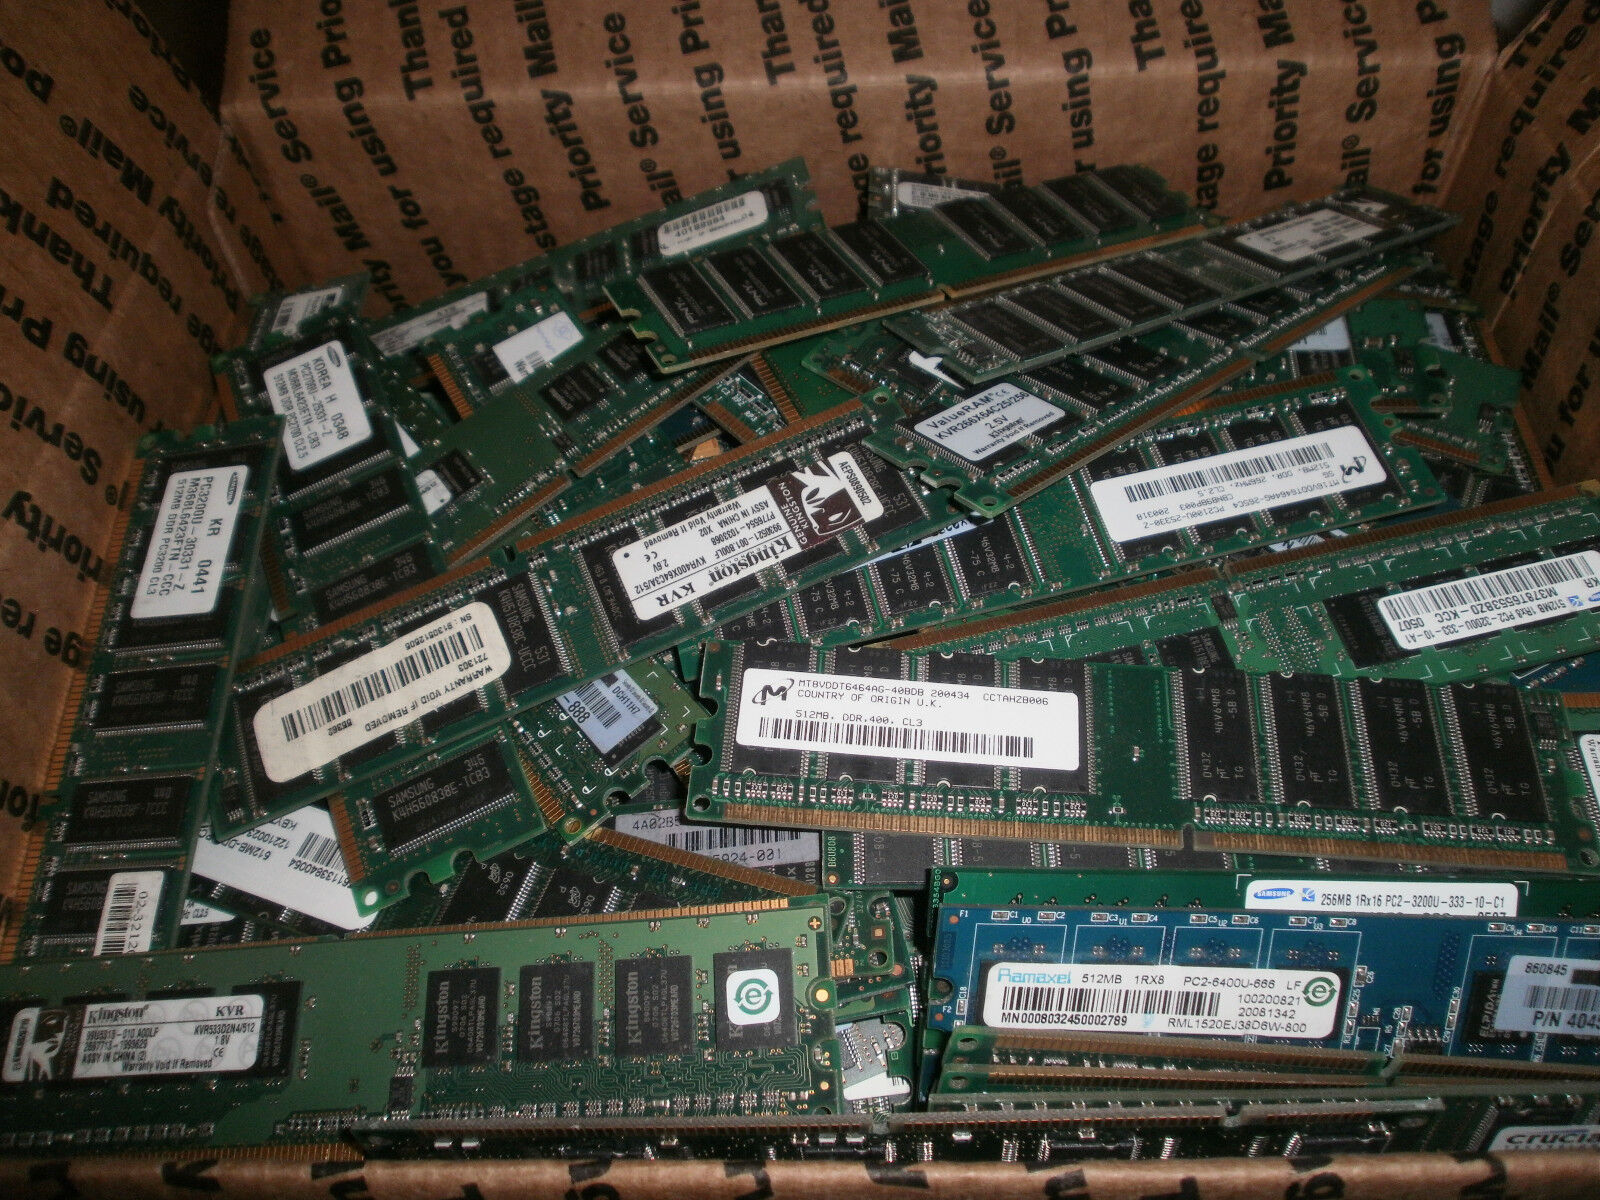 Over 15 lbs of Computer memory ram with gold fingers for scrap gold recovery